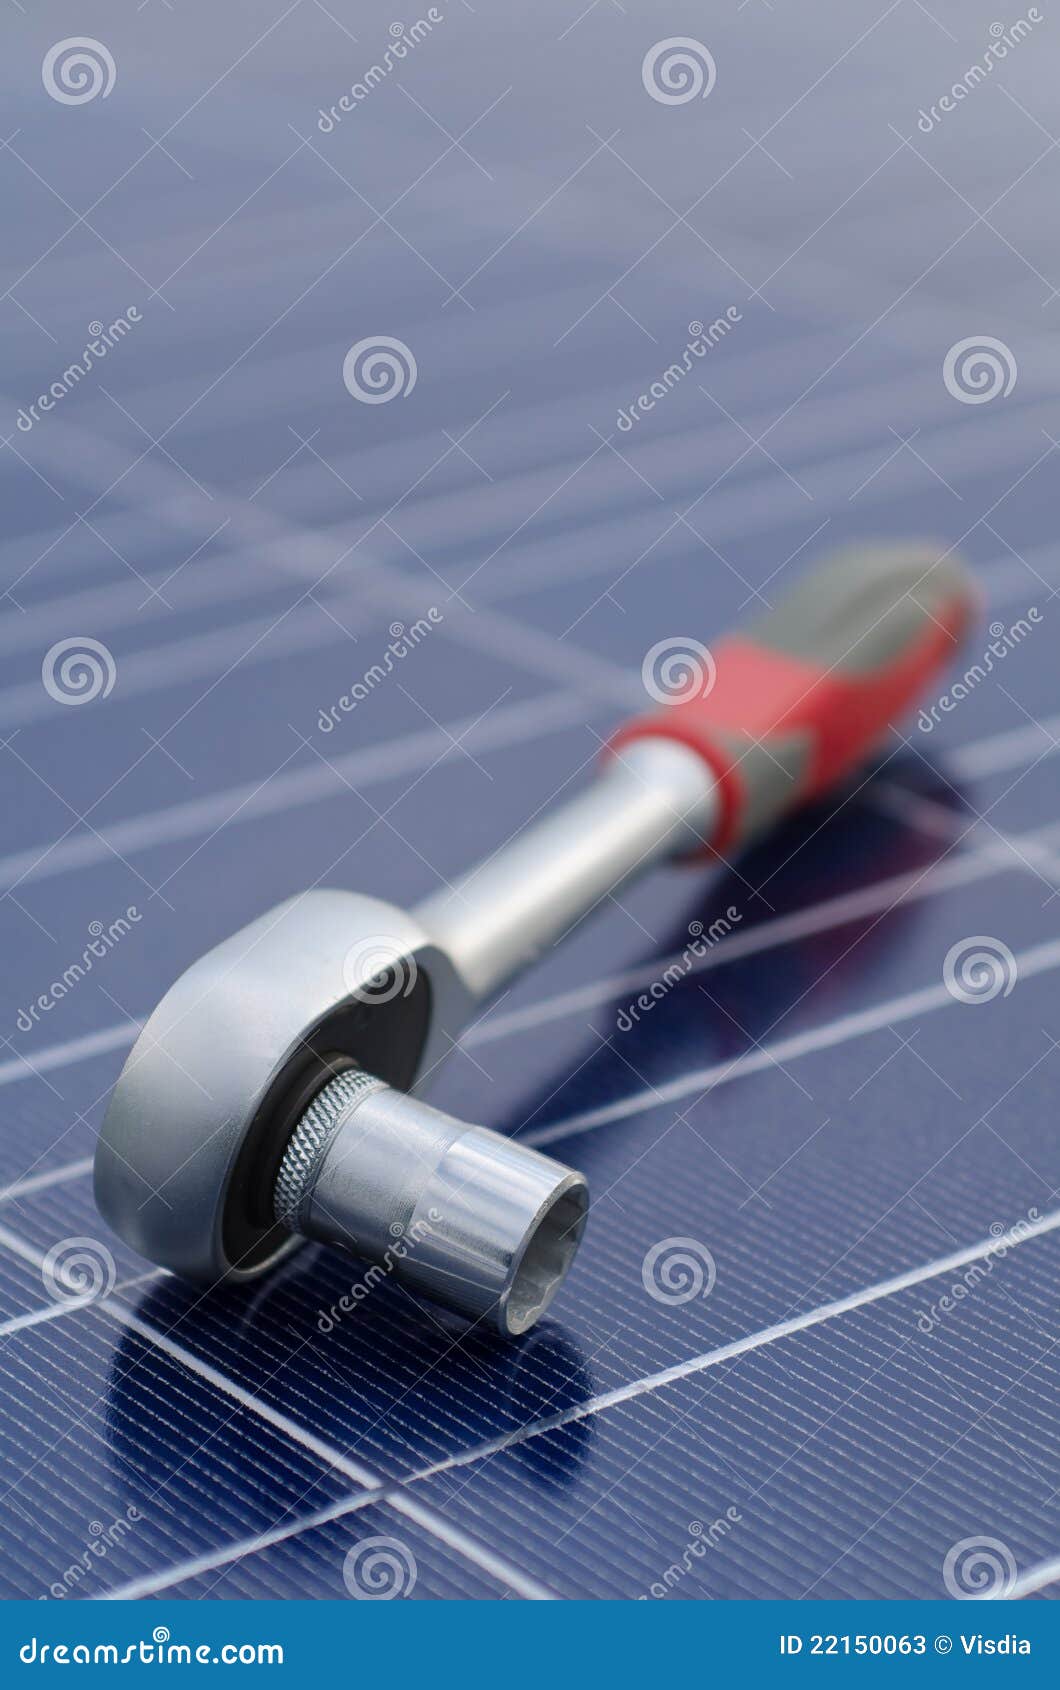 solar cells and ratchet wrench